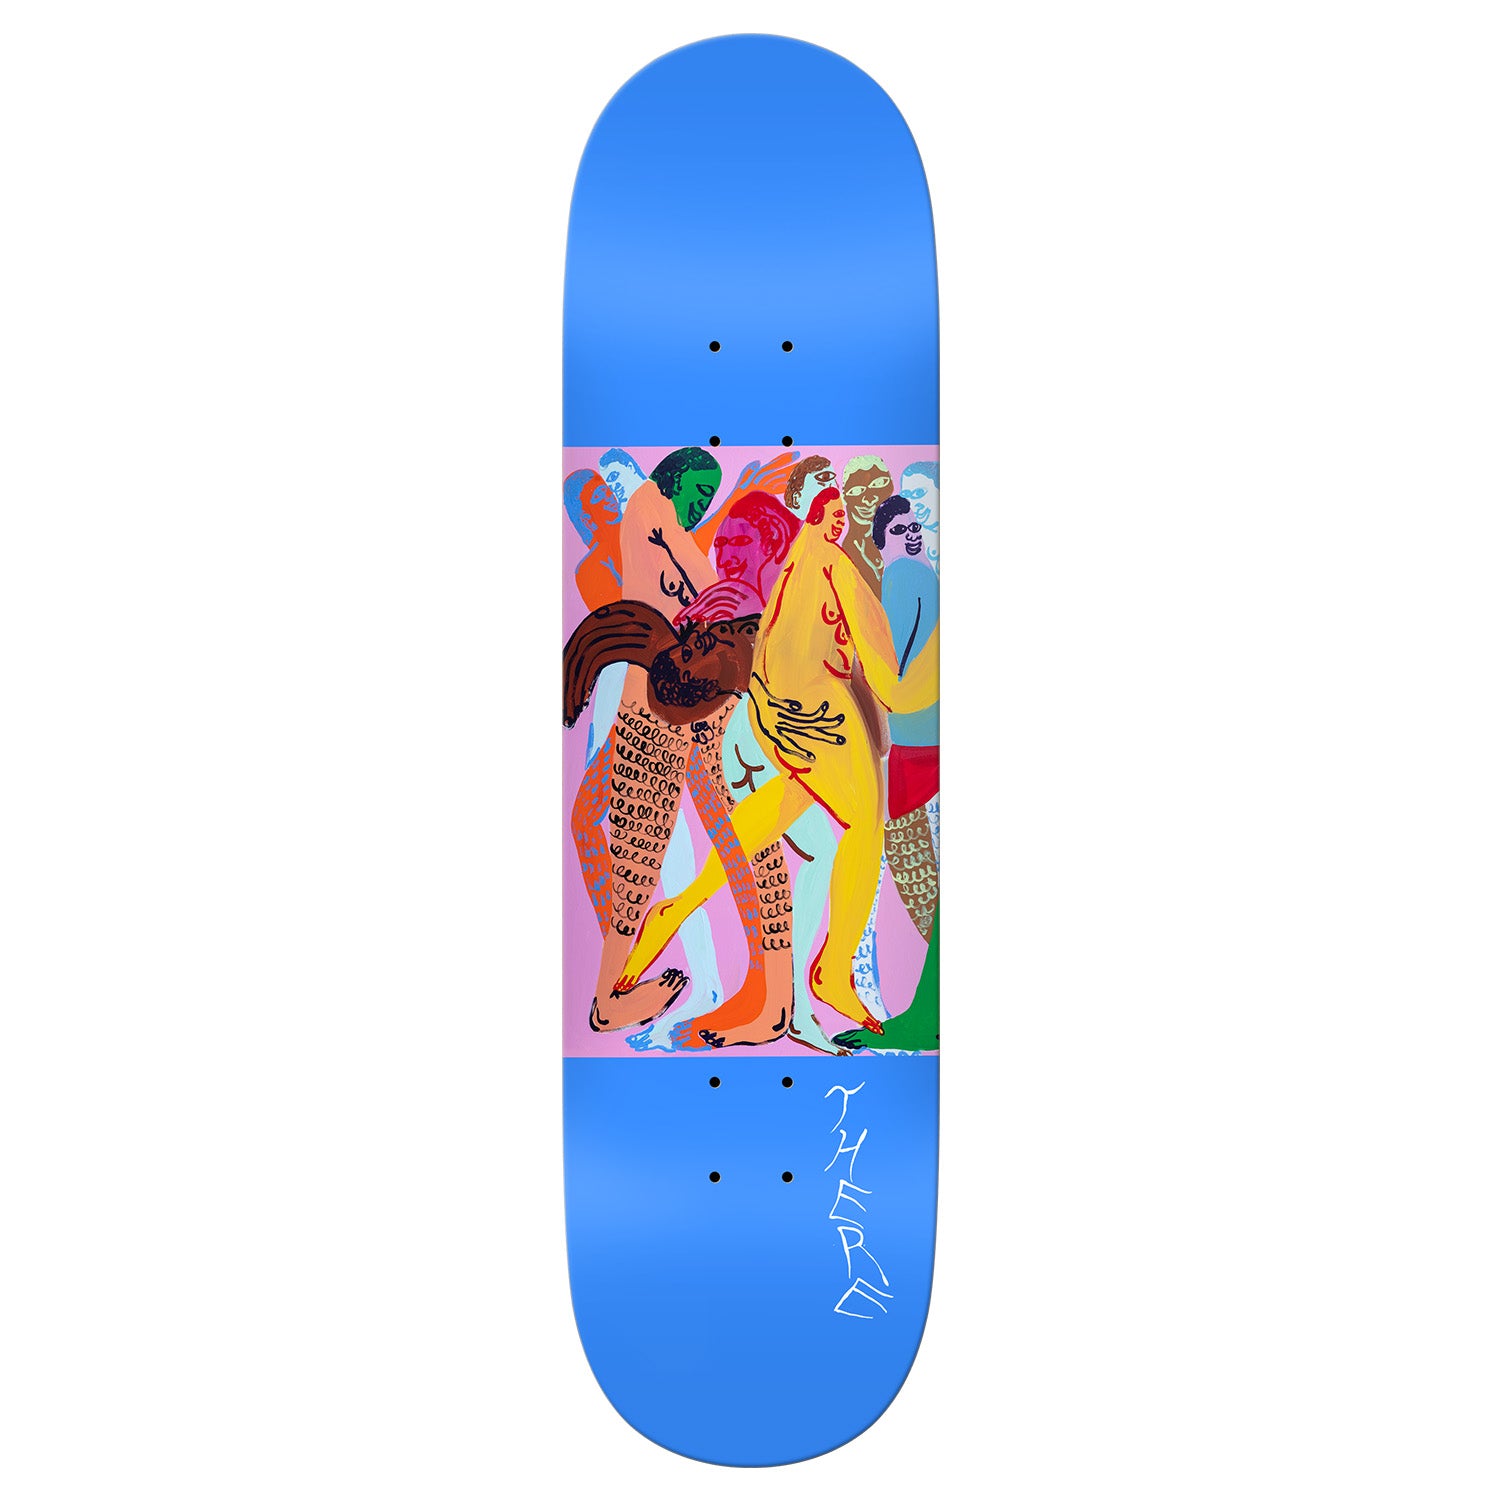 There Party True Fit Deck 8.25"